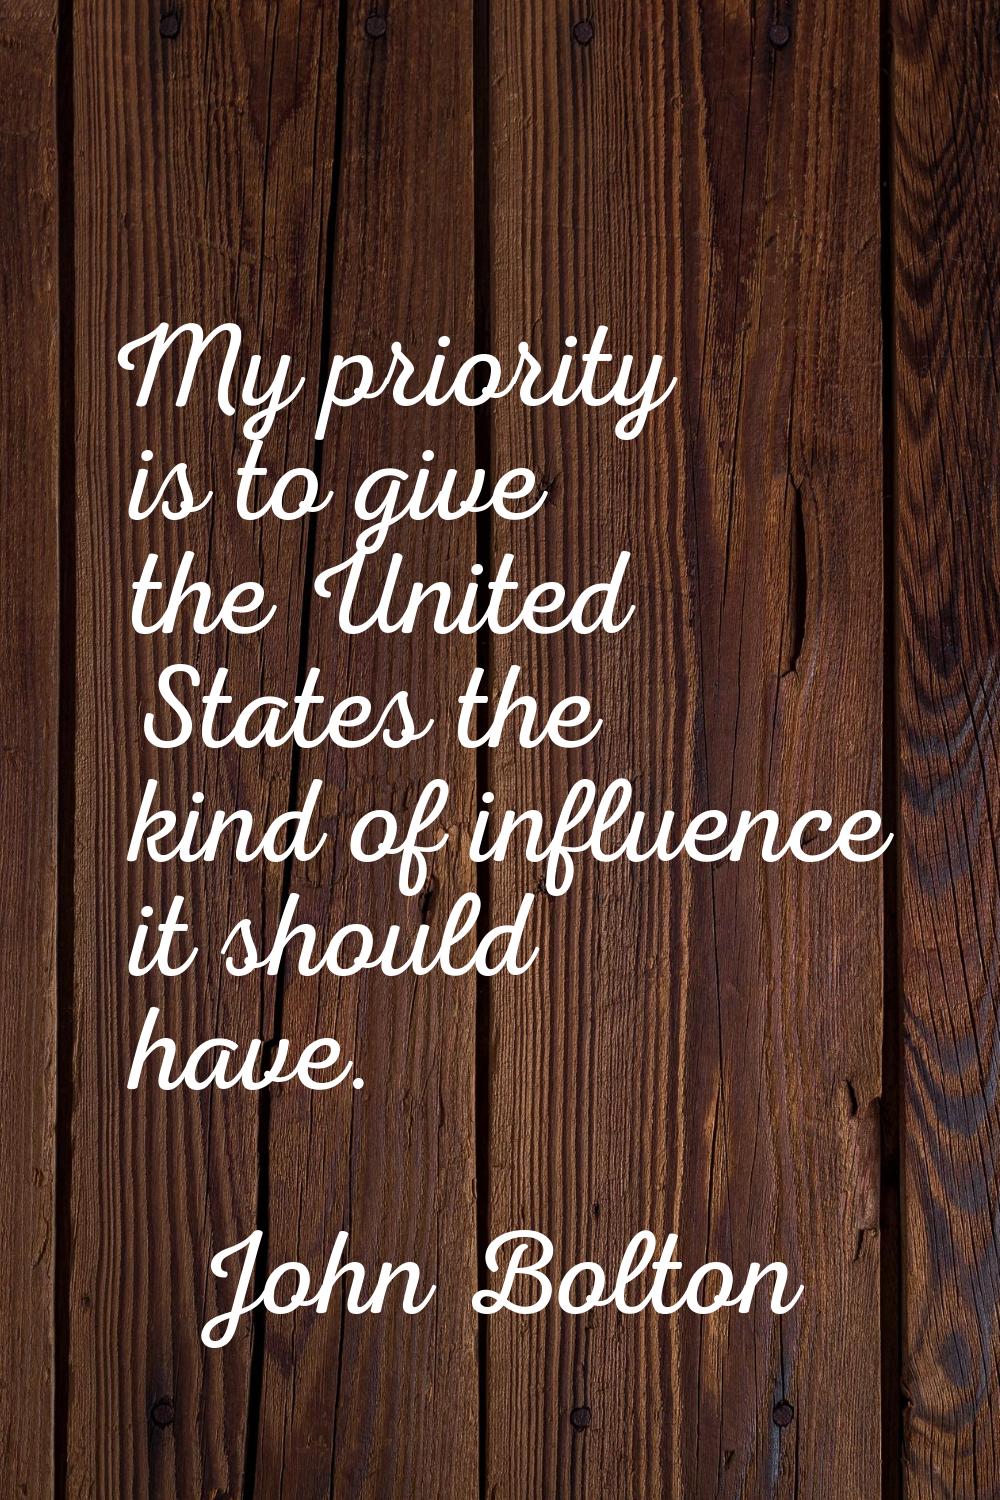 My priority is to give the United States the kind of influence it should have.